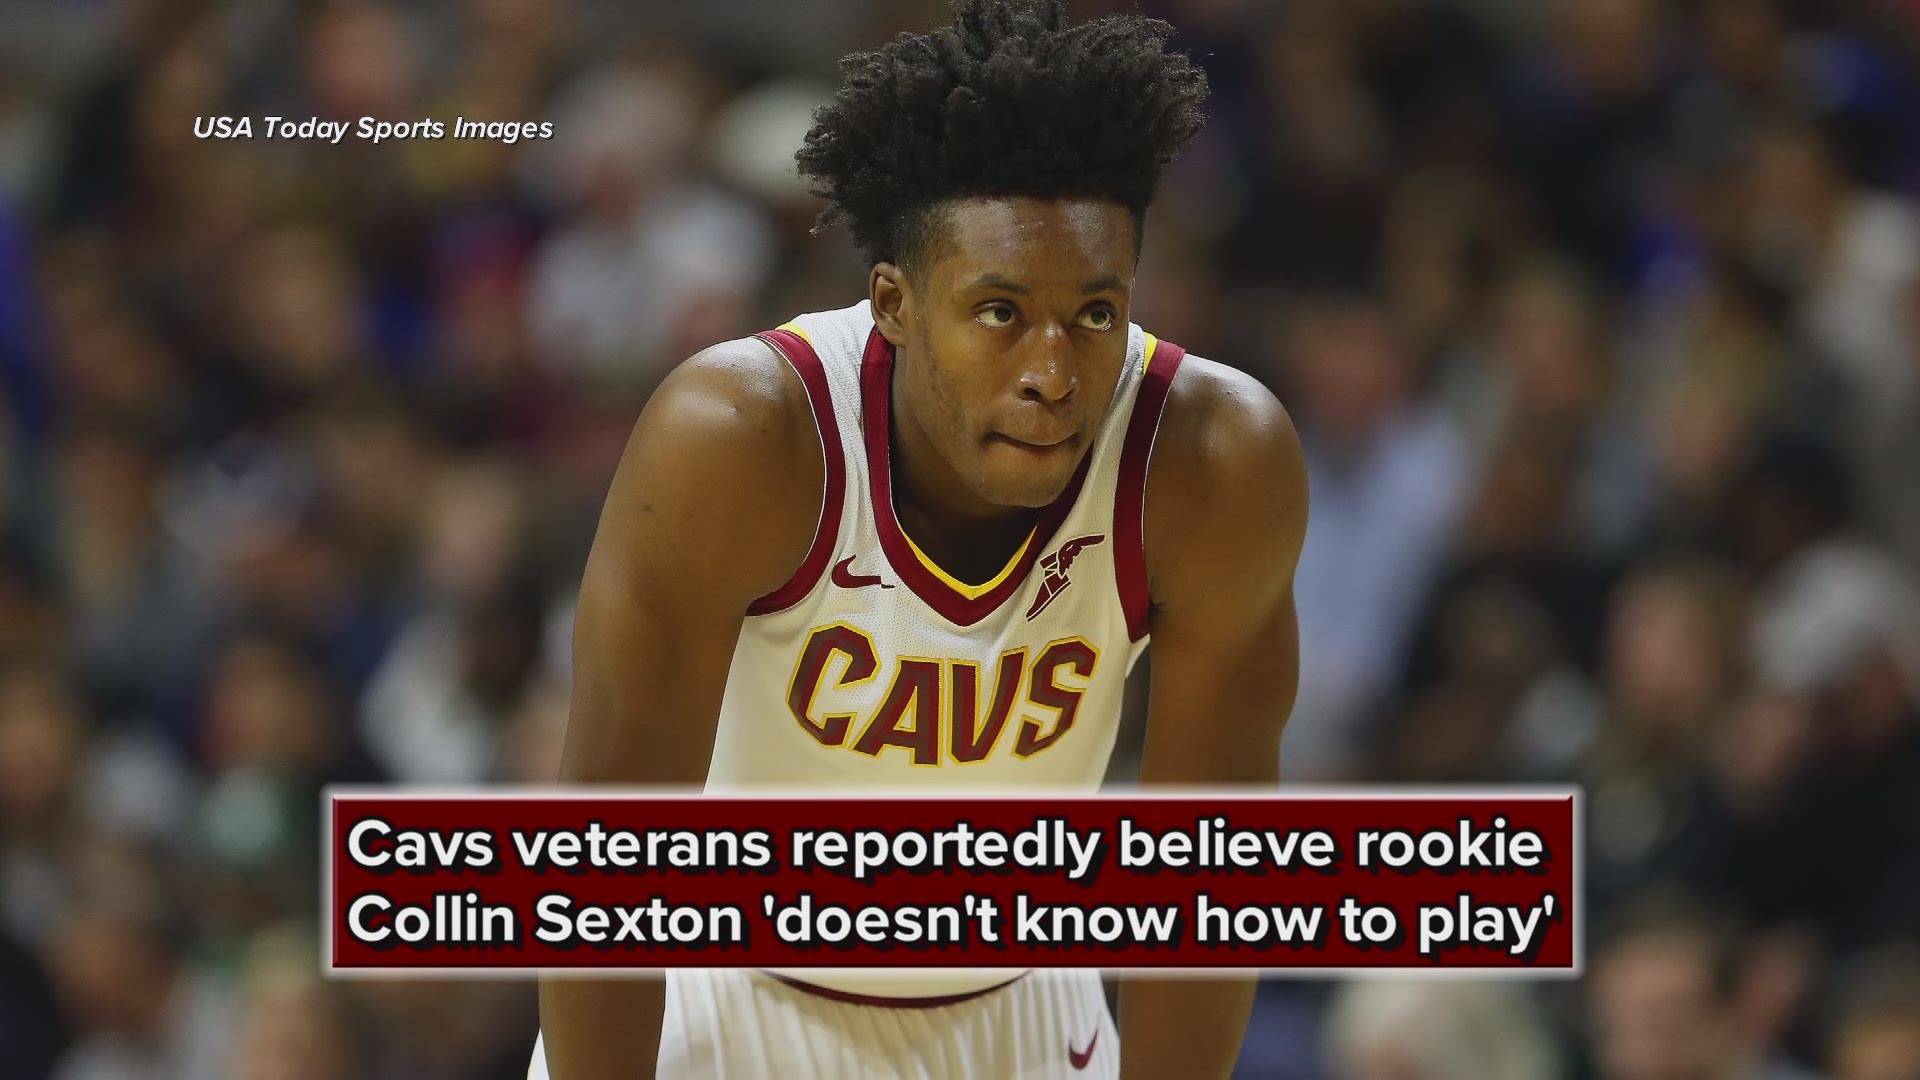 Report: Cleveland Cavaliers veterans believe rookie Collin Sexton 'doesn't know how to play'